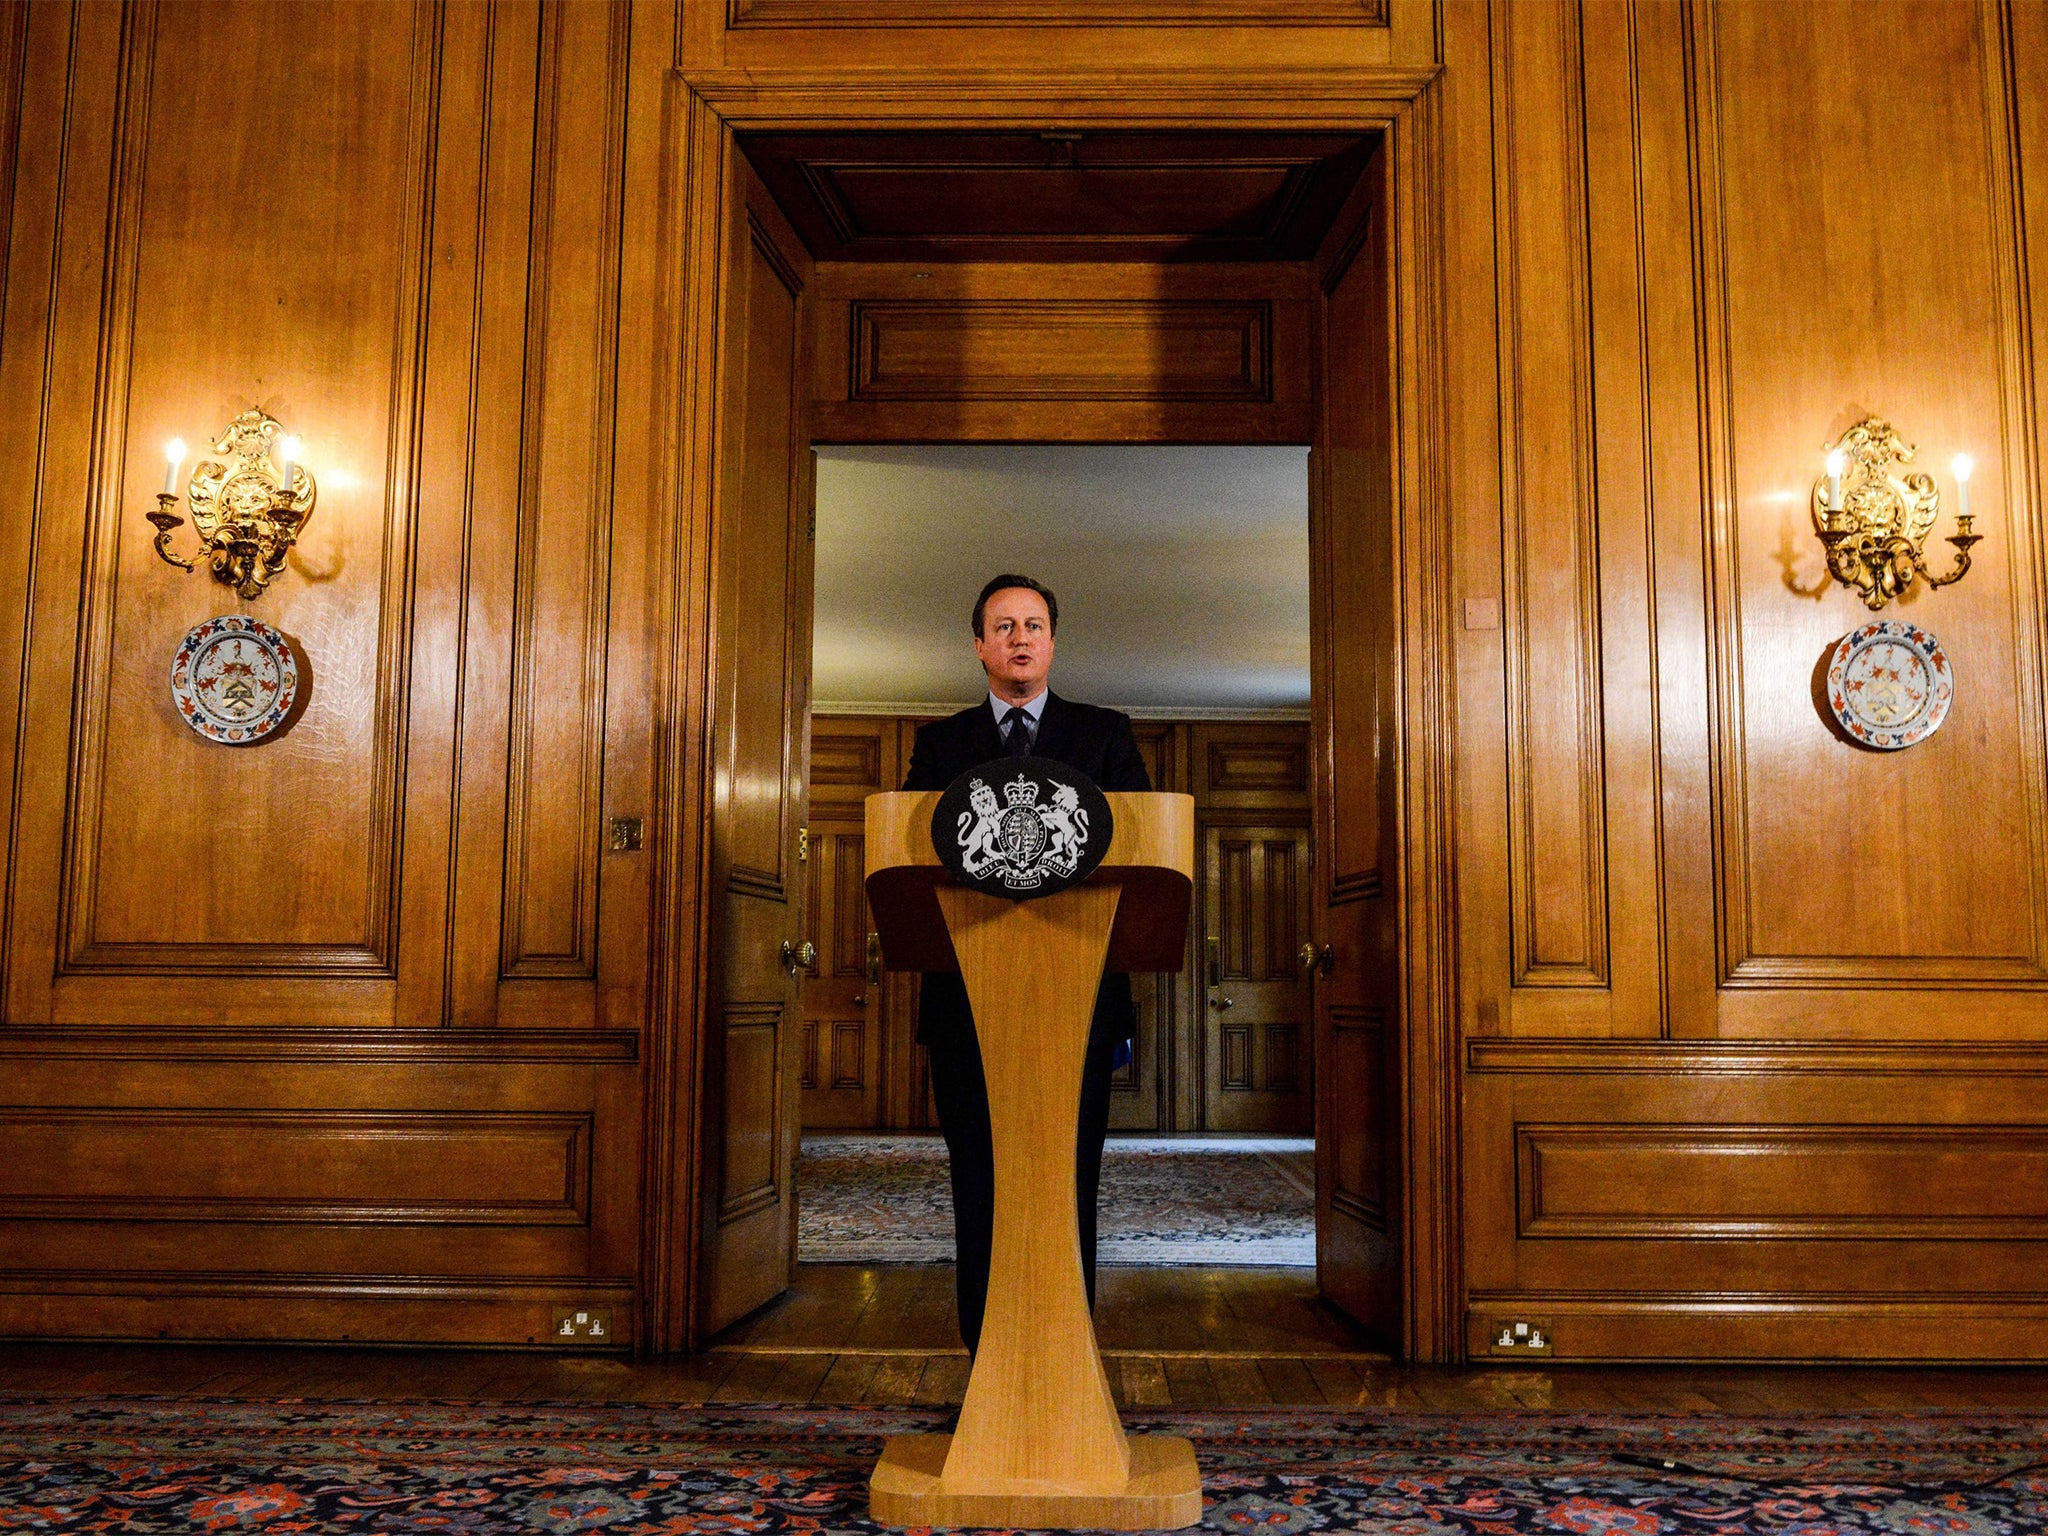 Prime Minister David Cameron speaks in the State Dining Room of 10 Downing Street, London after chairing an emergency Cobra meeting in the wake of a series of coordinated terrorist attacks in Paris